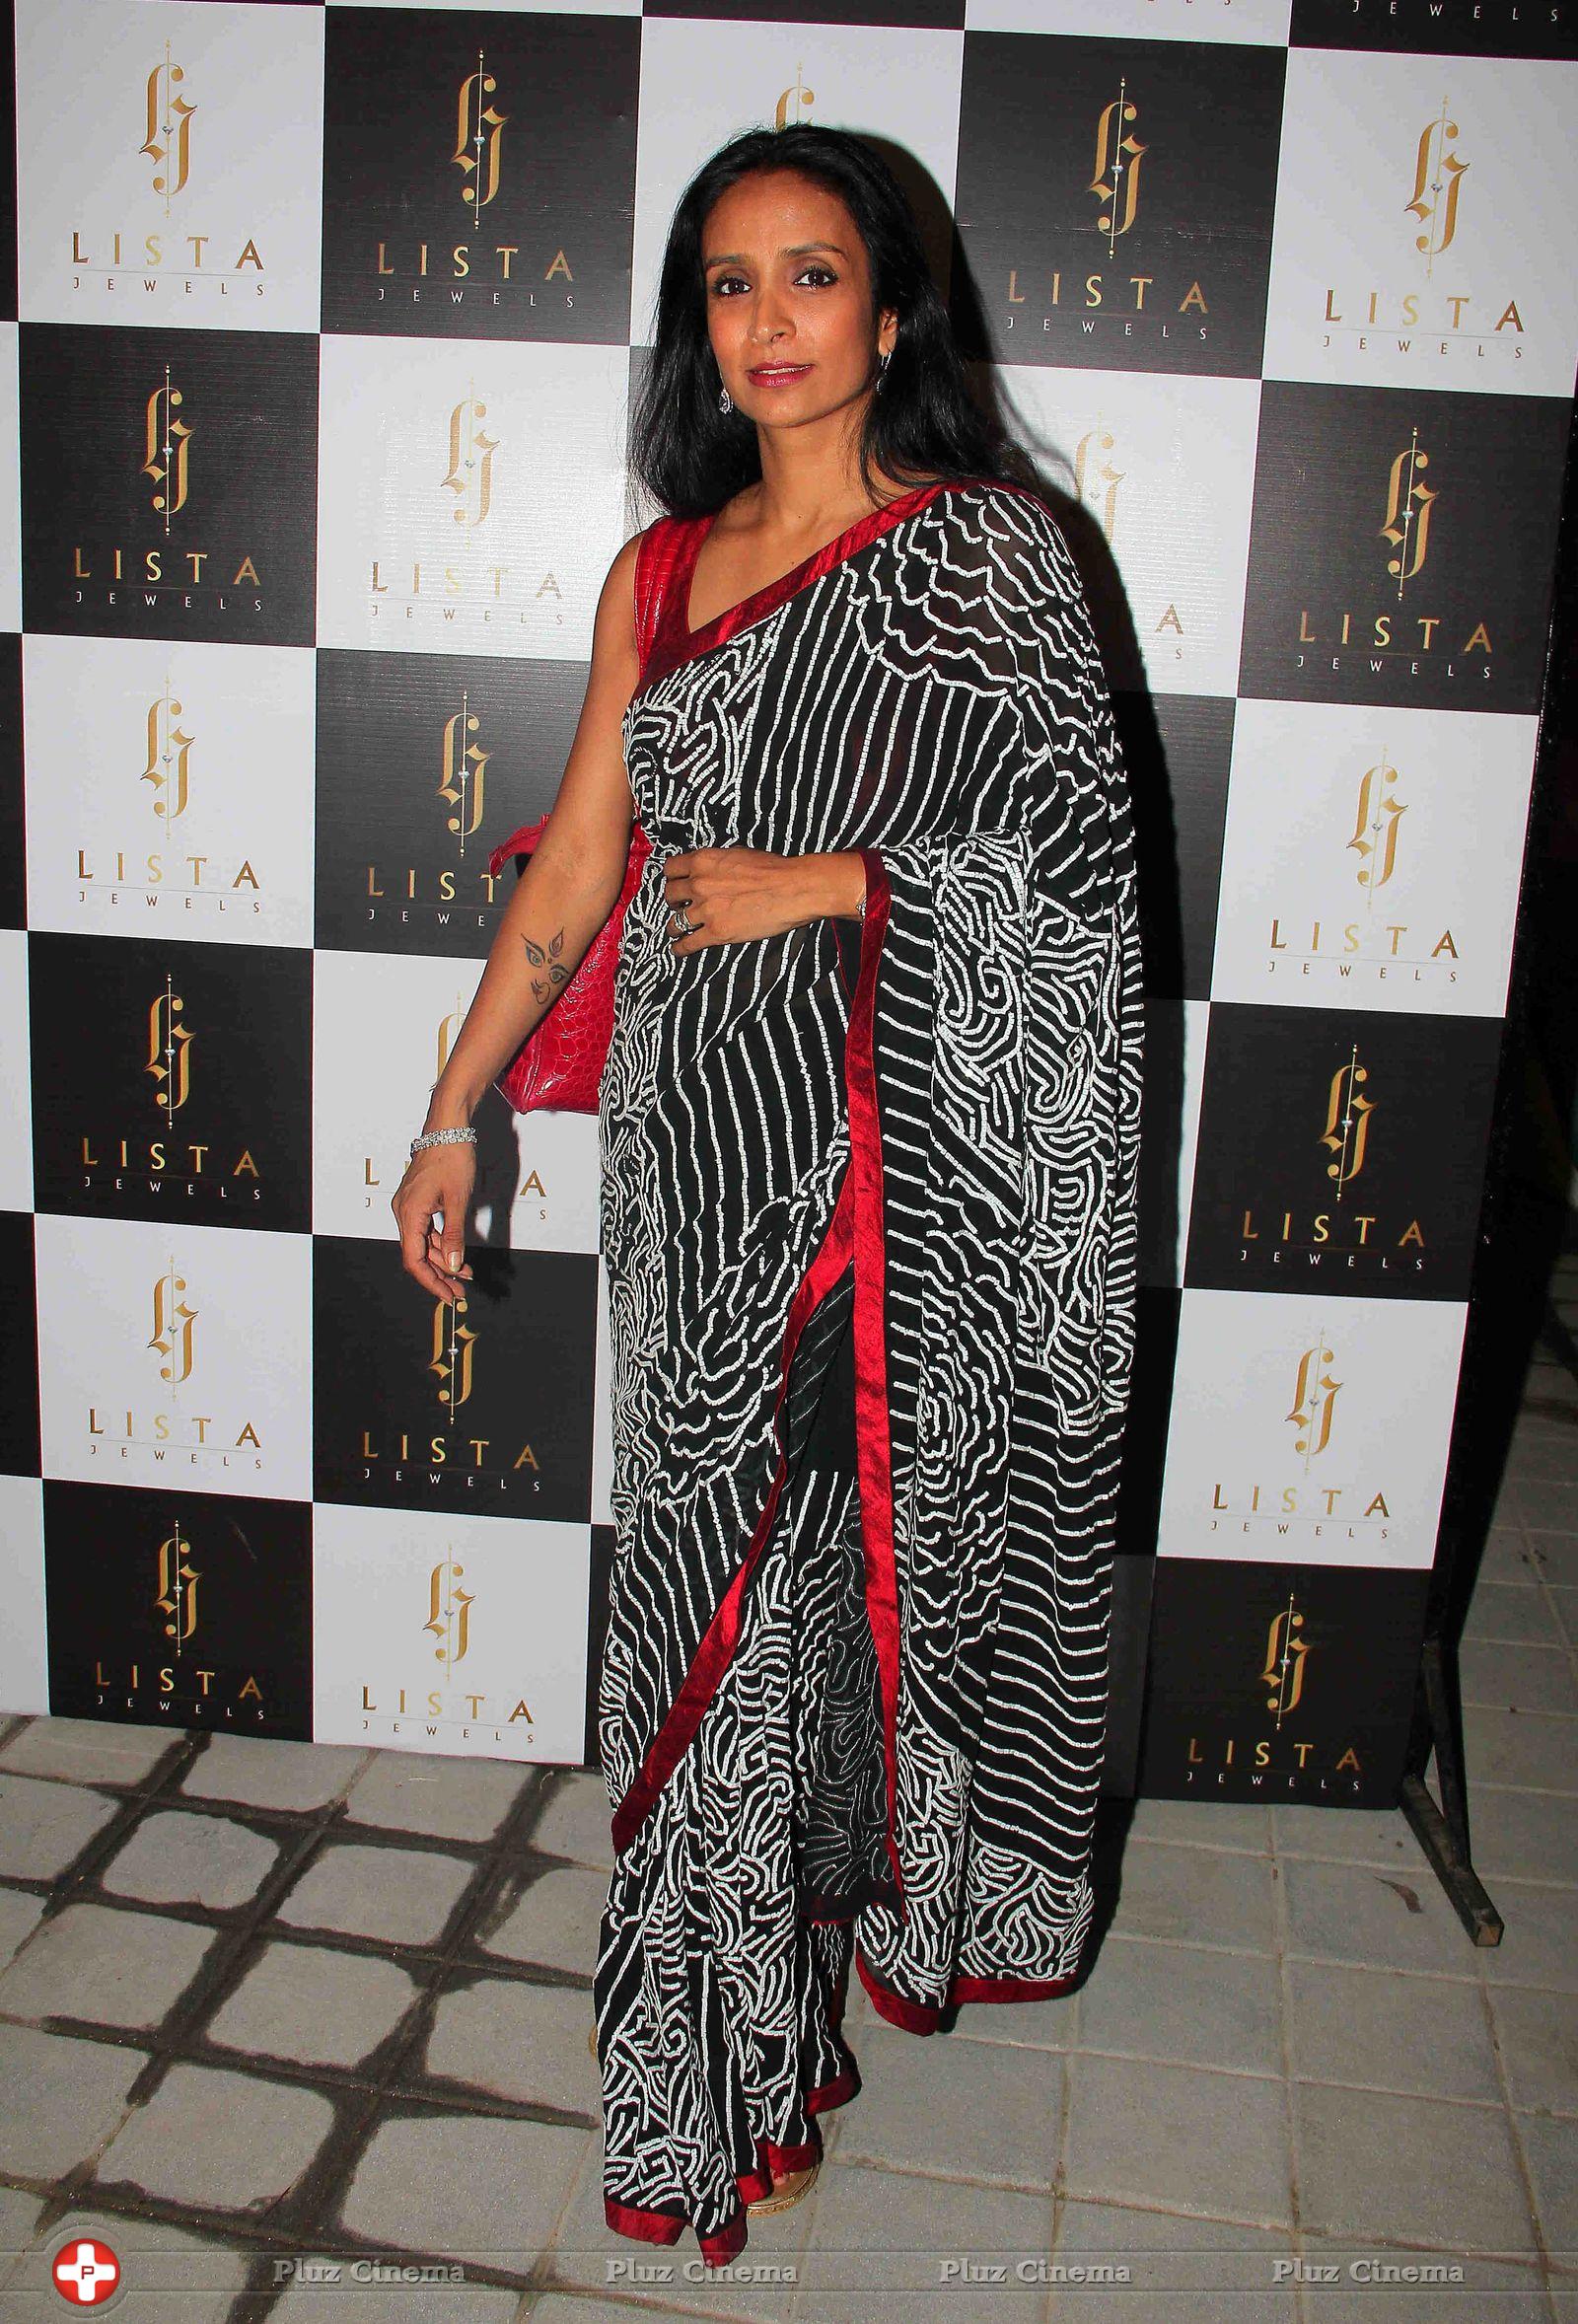 Suchitra Pillai-Malik - Shahrukh Khan & Others at The Launch of Lista Jewellery Store Photos | Picture 622855